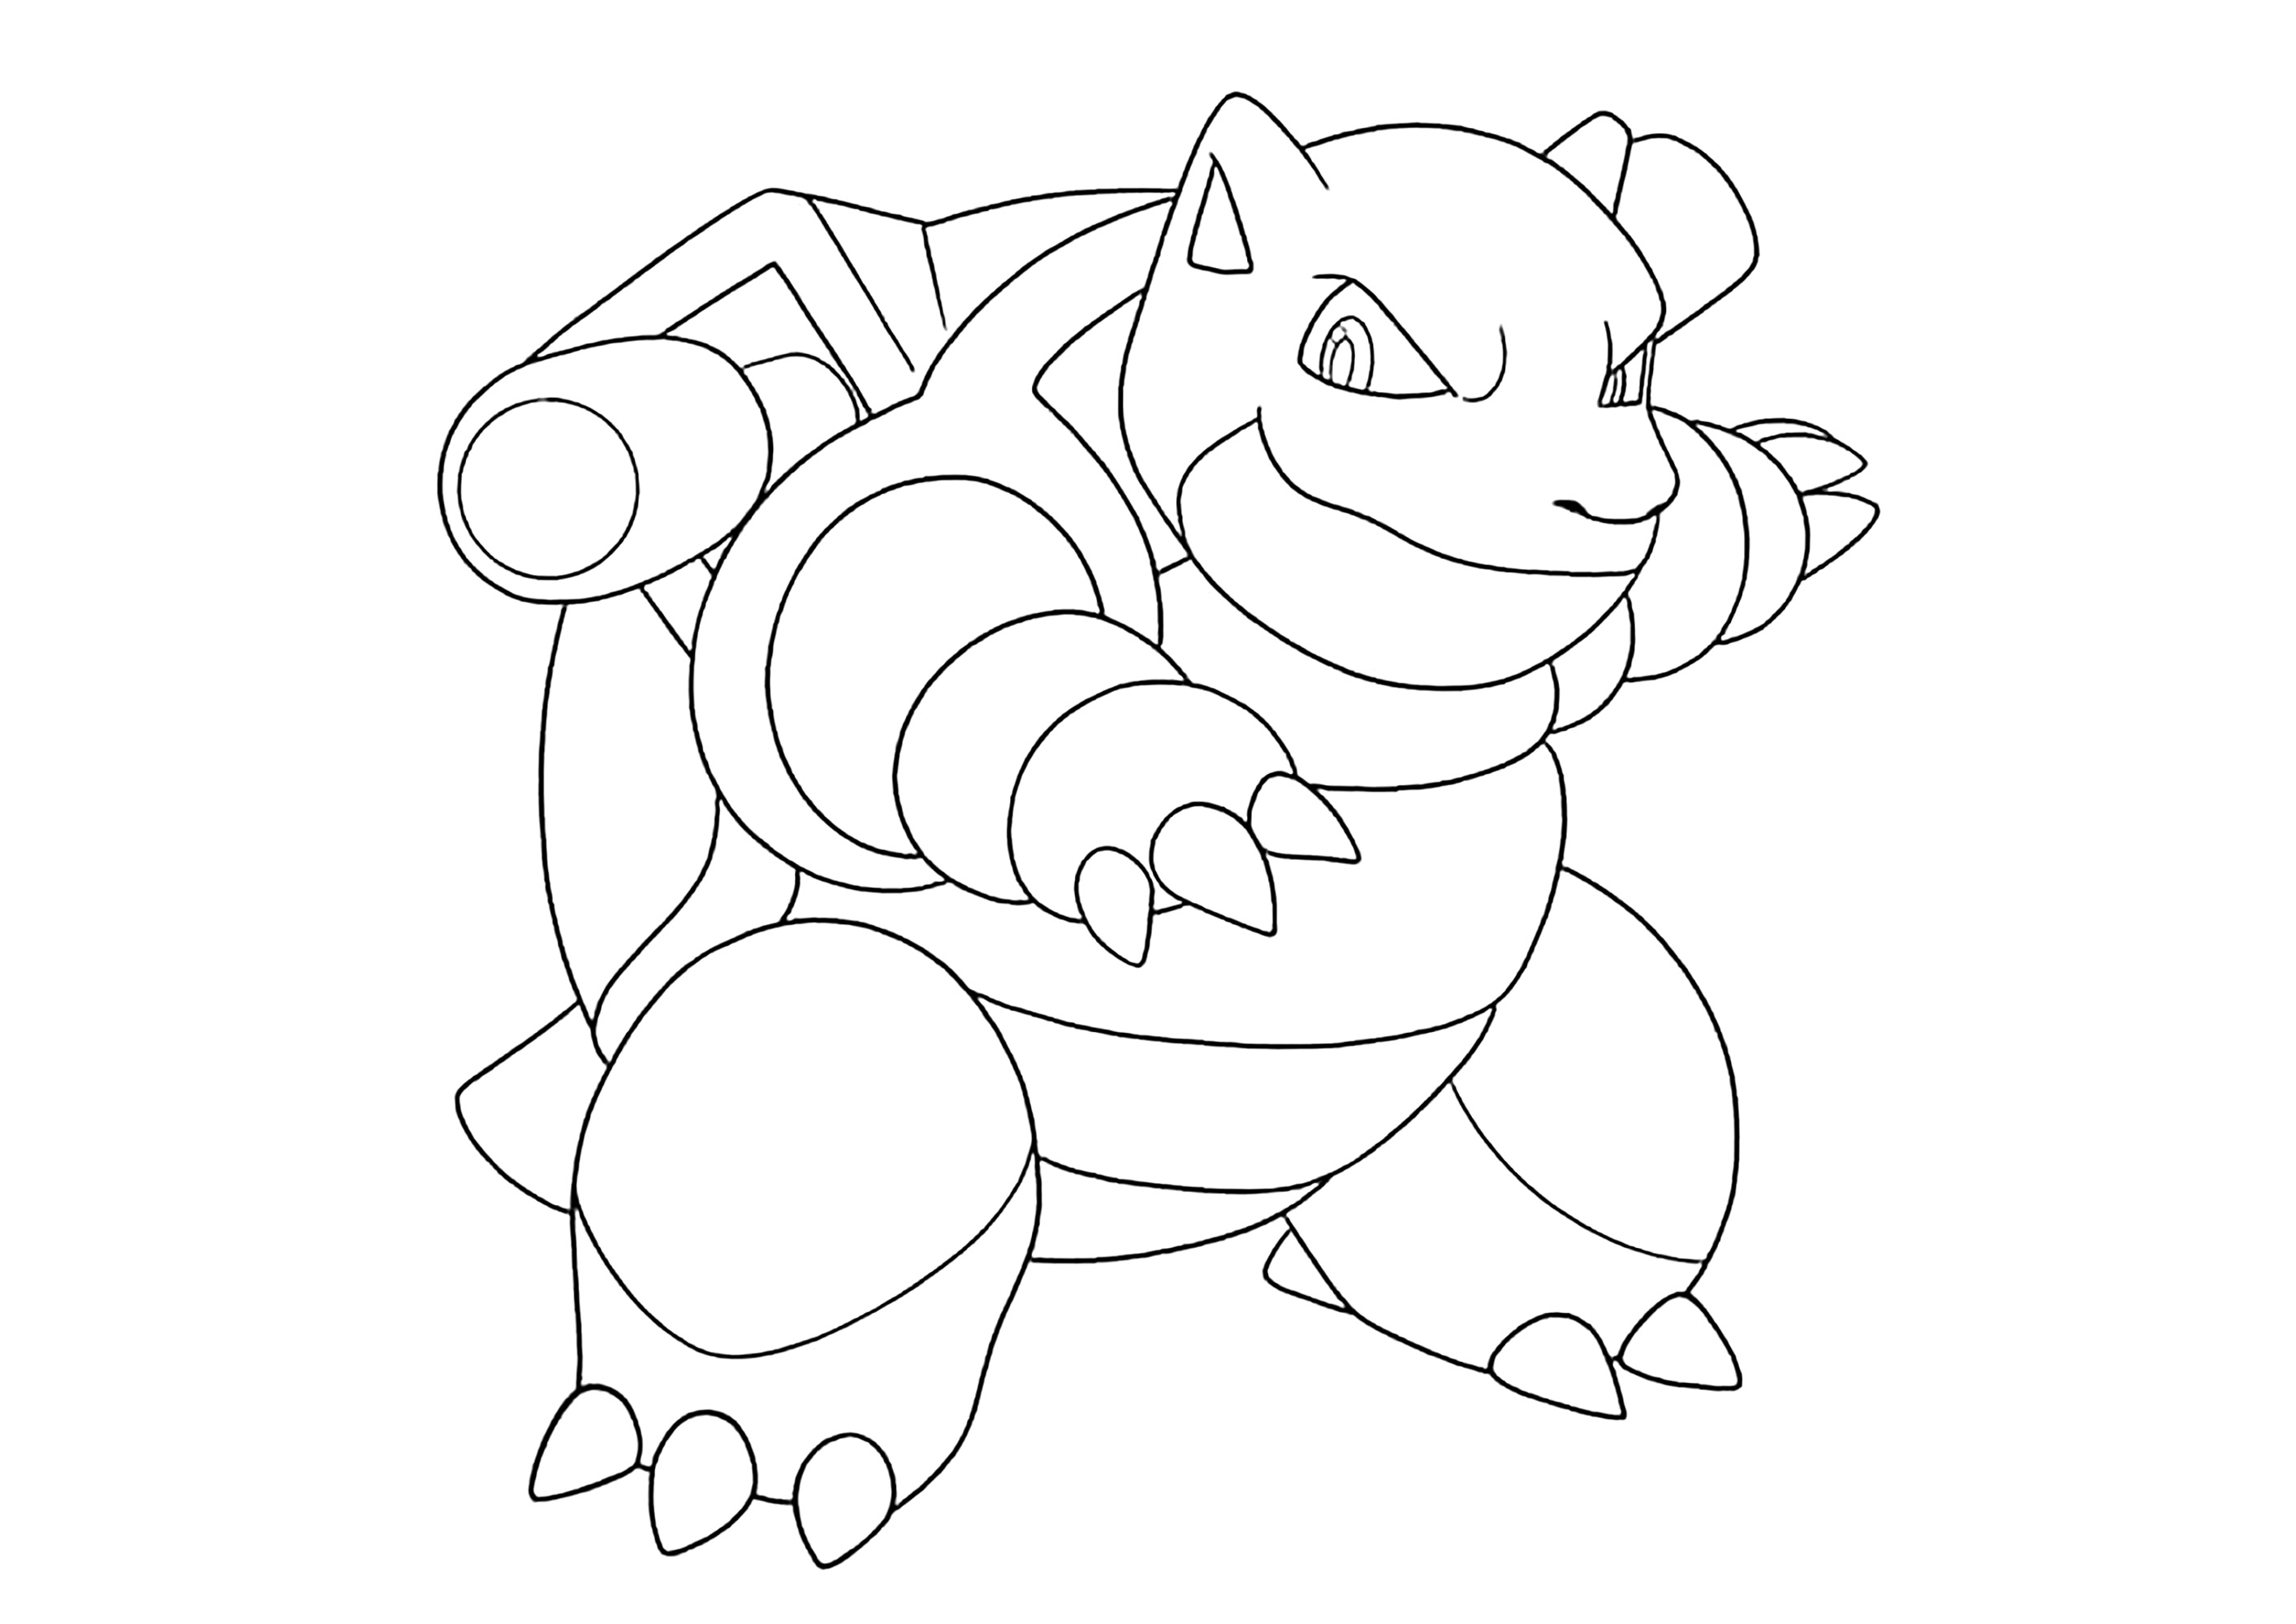 Blastoise : Easy coloring page